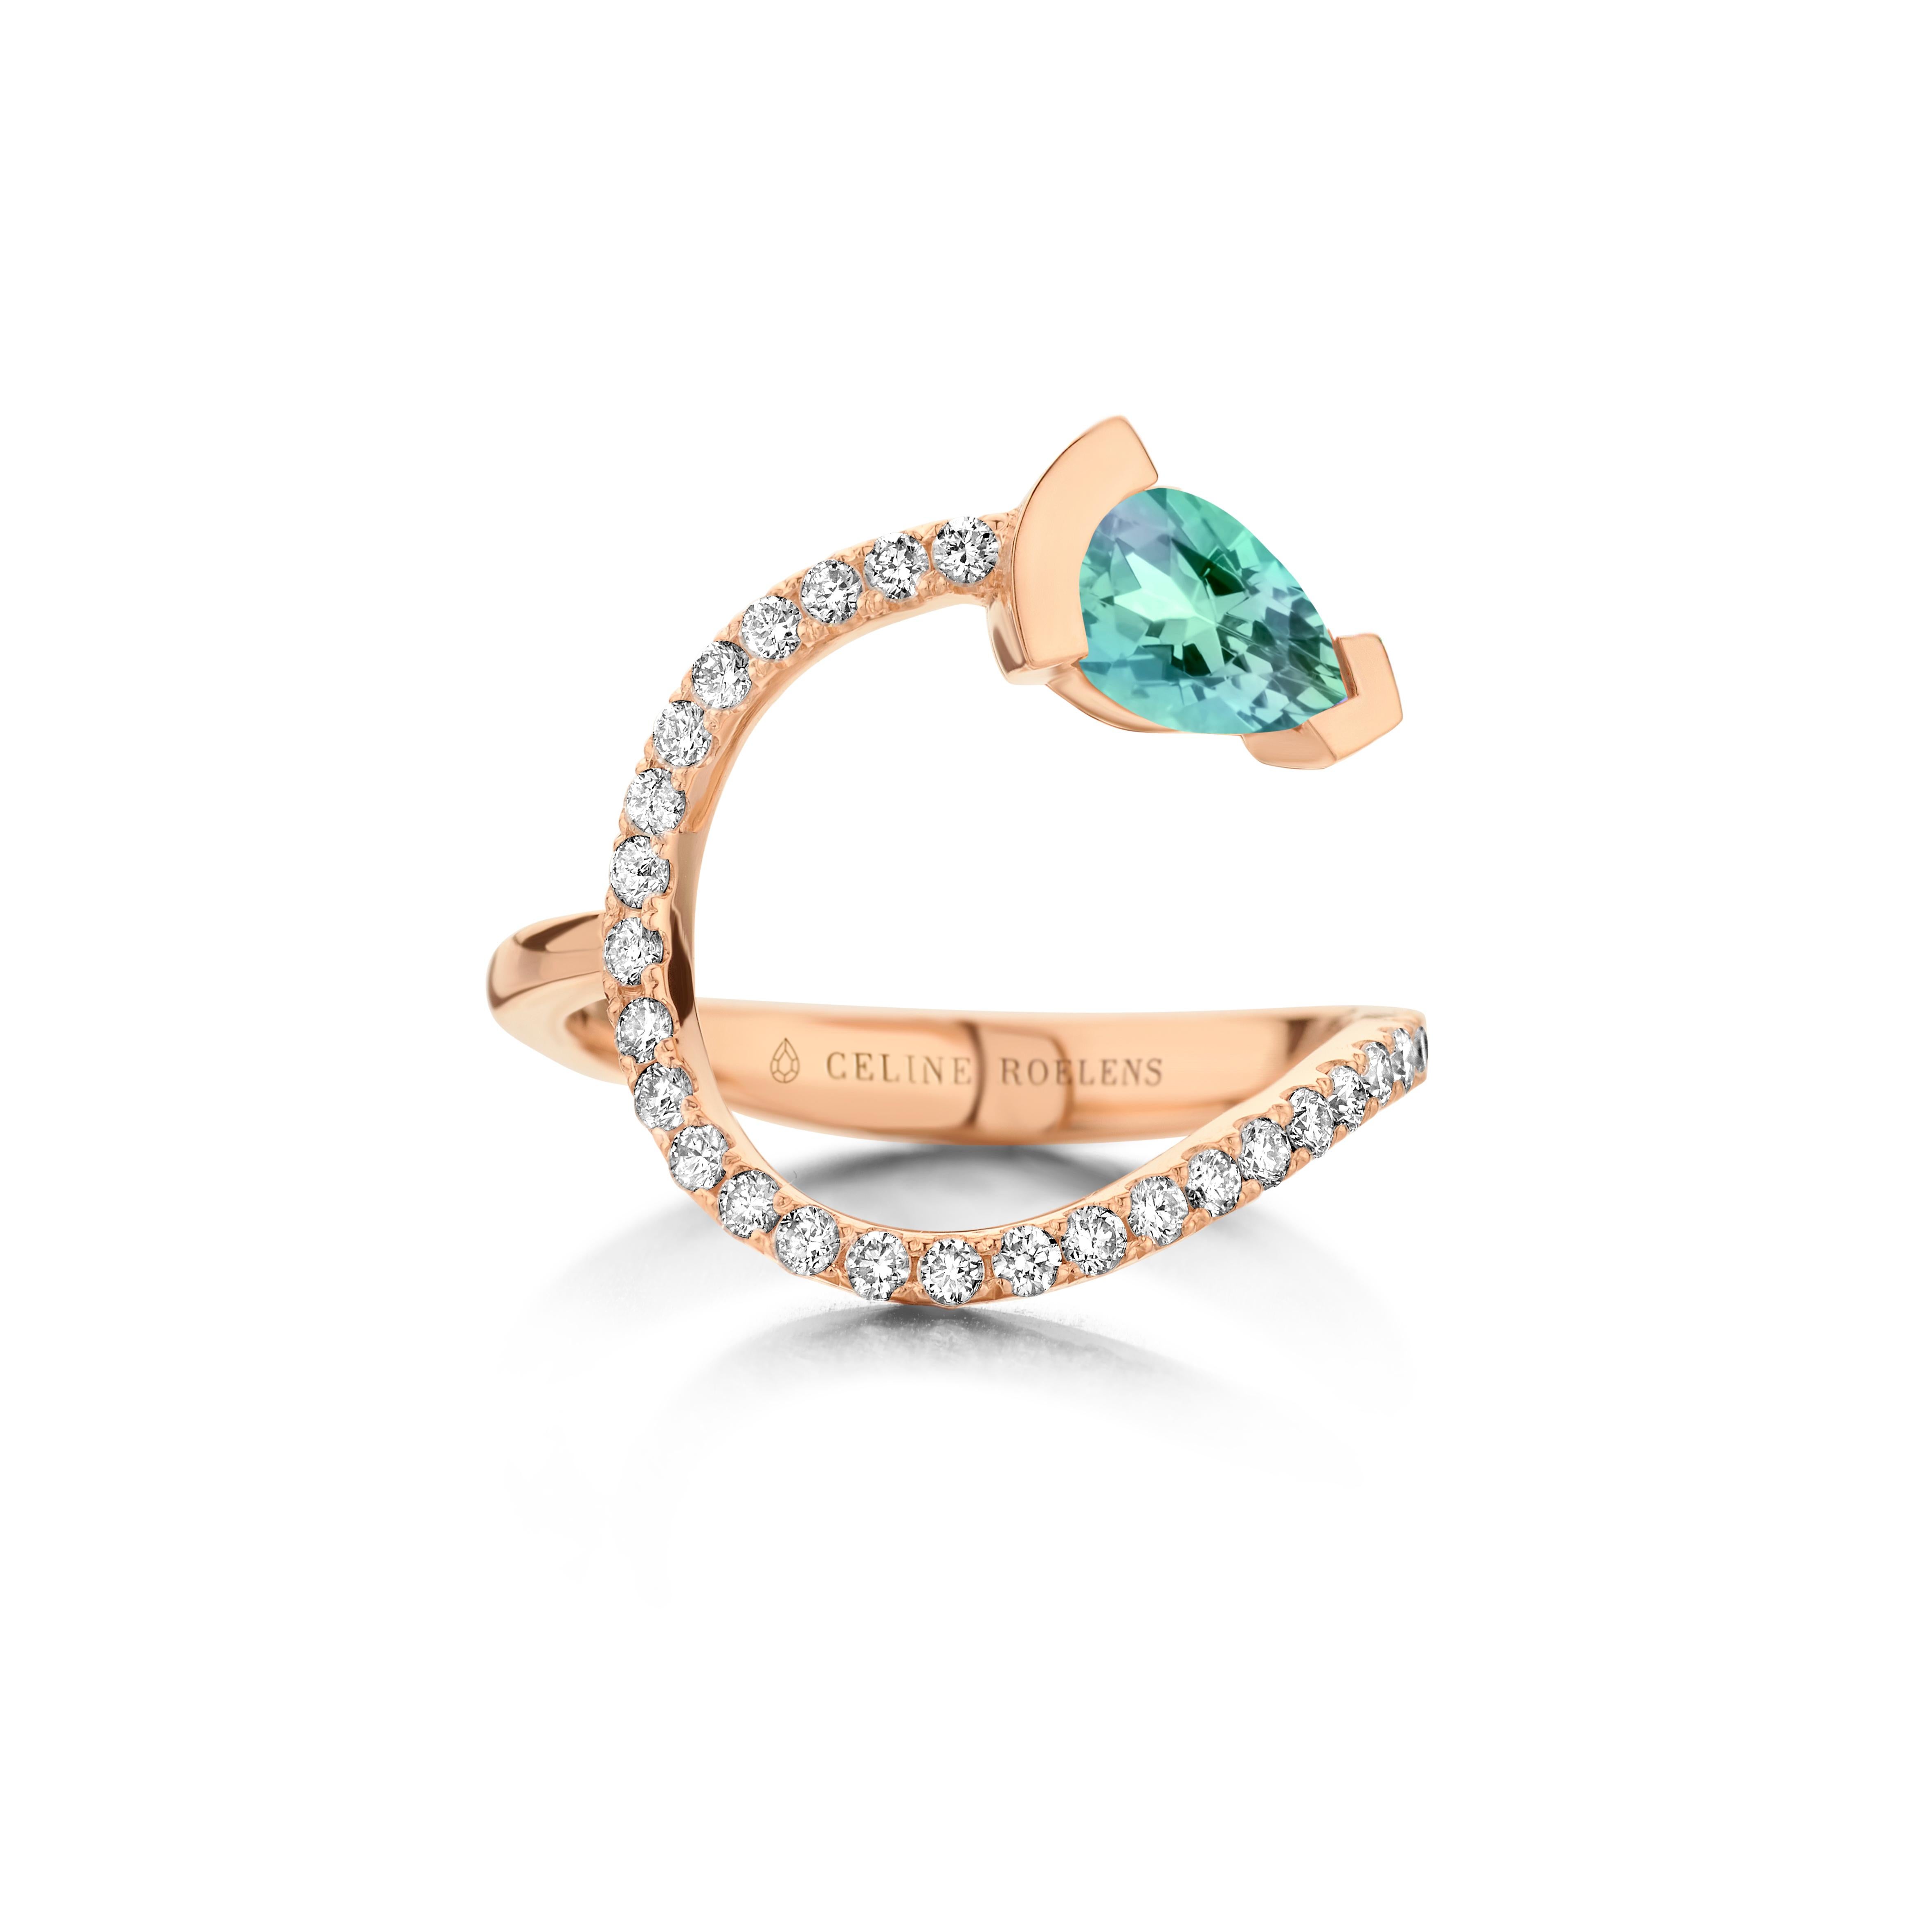 ADELINE curved ring in 18Kt yellow gold set with a pear shaped Mint tourmaline and 0,33 Ct of white brilliant cut diamonds - VS F quality.